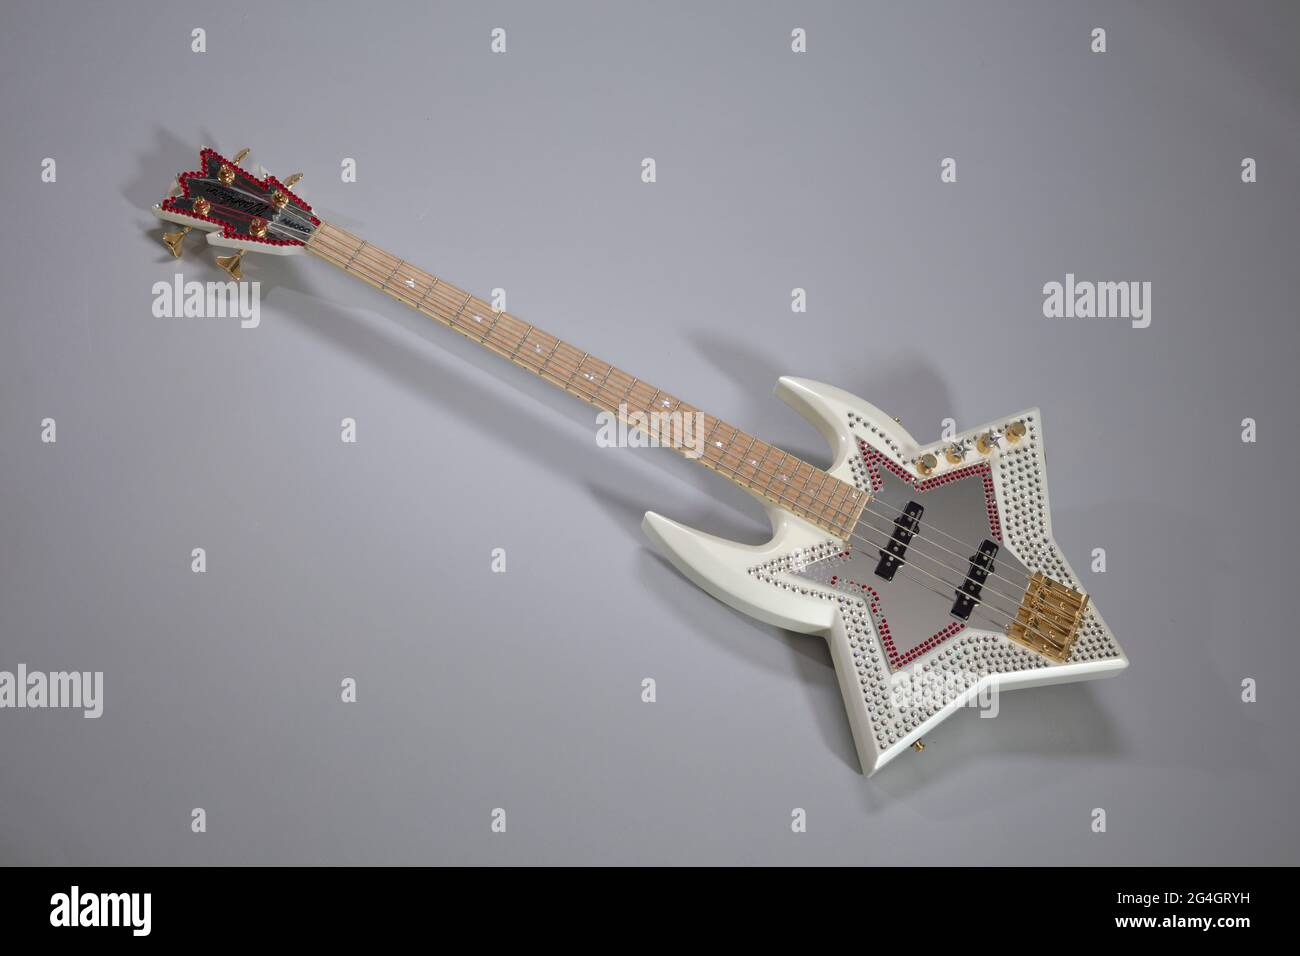 A limited edition, Bootsy Collins Space Bass from Washburn Guitars (TR2013-140.1.1) owned by Bootsy Collins. This is a four-stringed electric bass guitar with an asymmetrical star shaped body modeled from Bootsy Collin's Space Bass guitar. The guitar is decorated with silver and red crystal elements and a mirrored pickguard. The silver crystal elements on the bass guitar are in a star pattern around the pickguard. The red crystal elements decorate the edge of the mirror pickguard. Red and silver crystal elements decorate the headstock. The guitar has two (2) black electric pick-ups at the cent Stock Photo